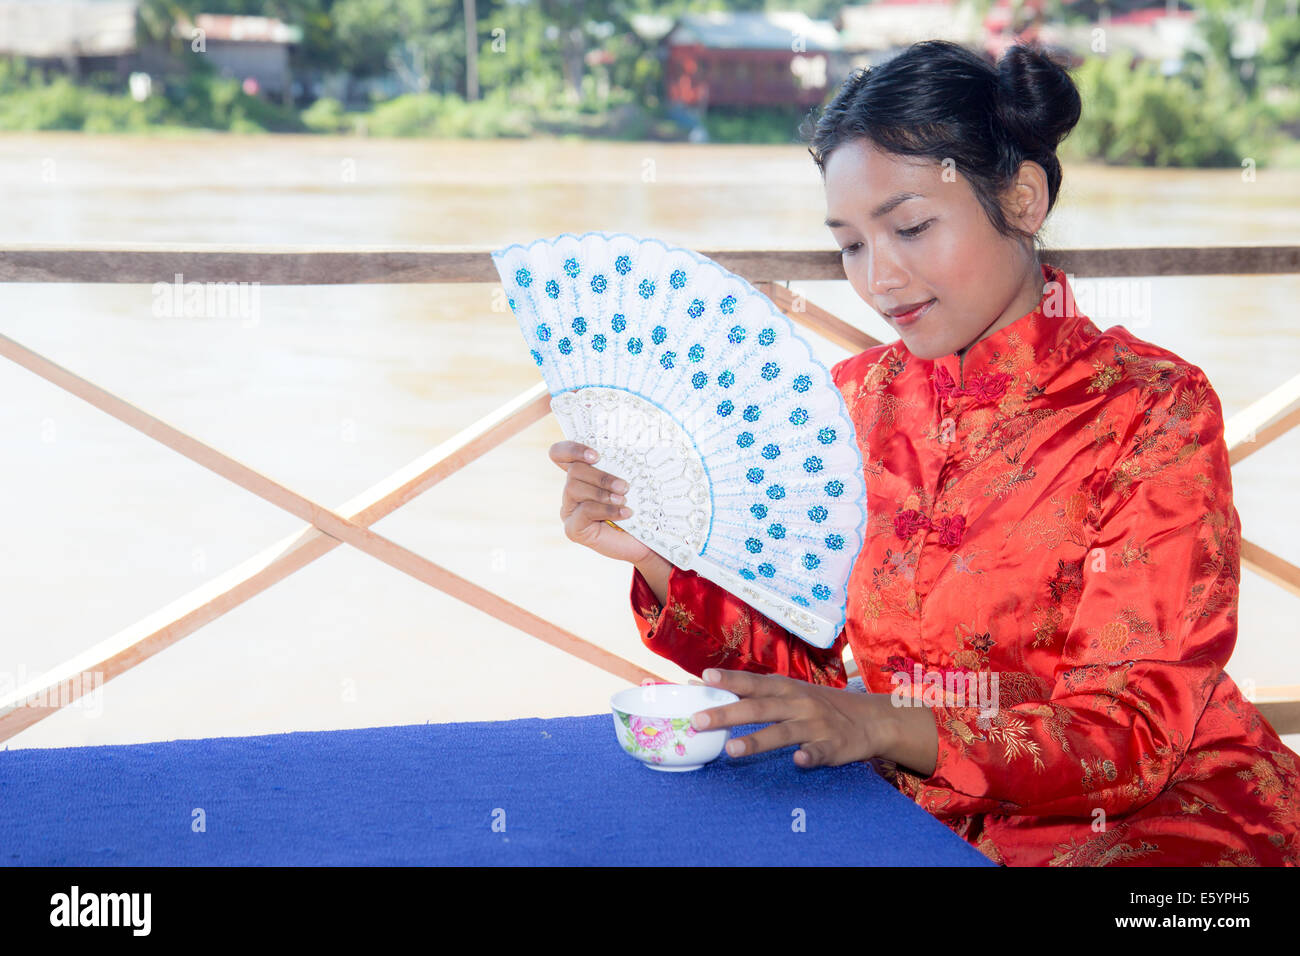 Asian woman holding fan and cup Stock Photo